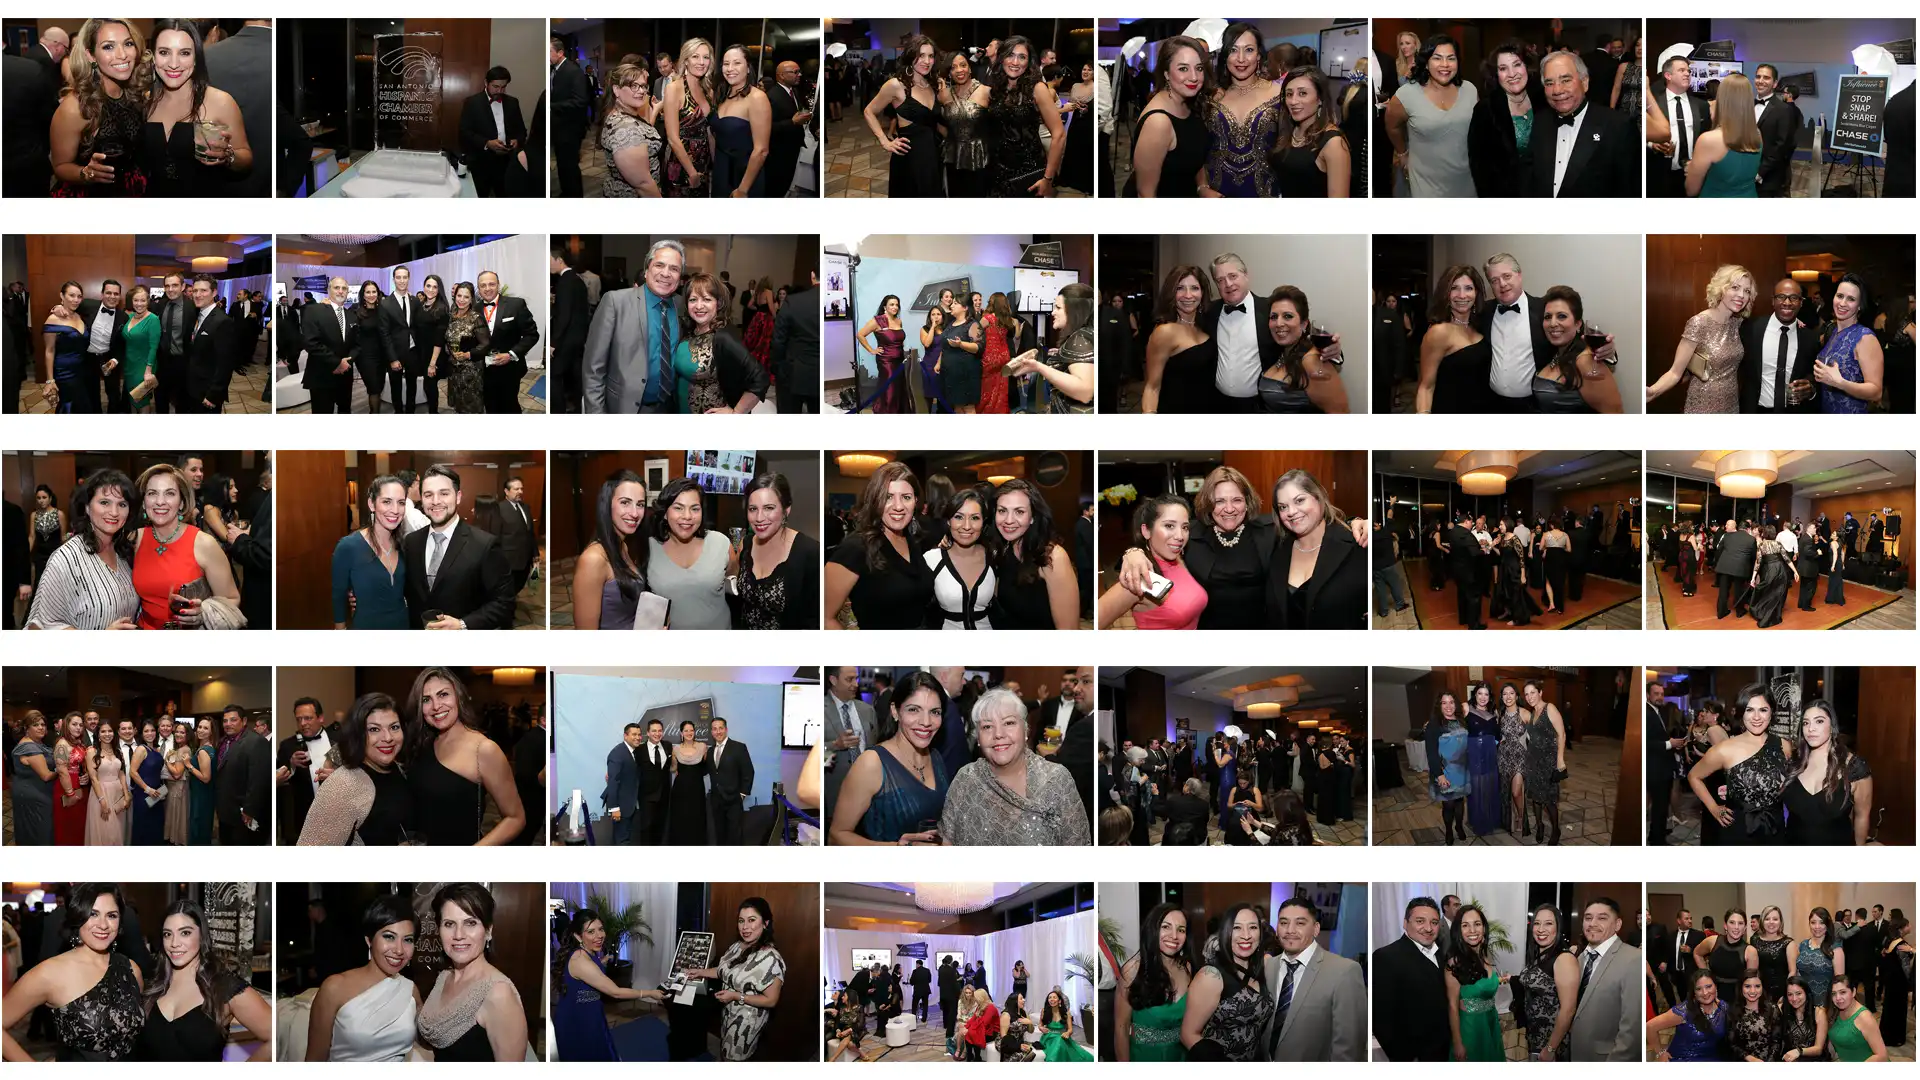 Gala Images from San Antonio Event